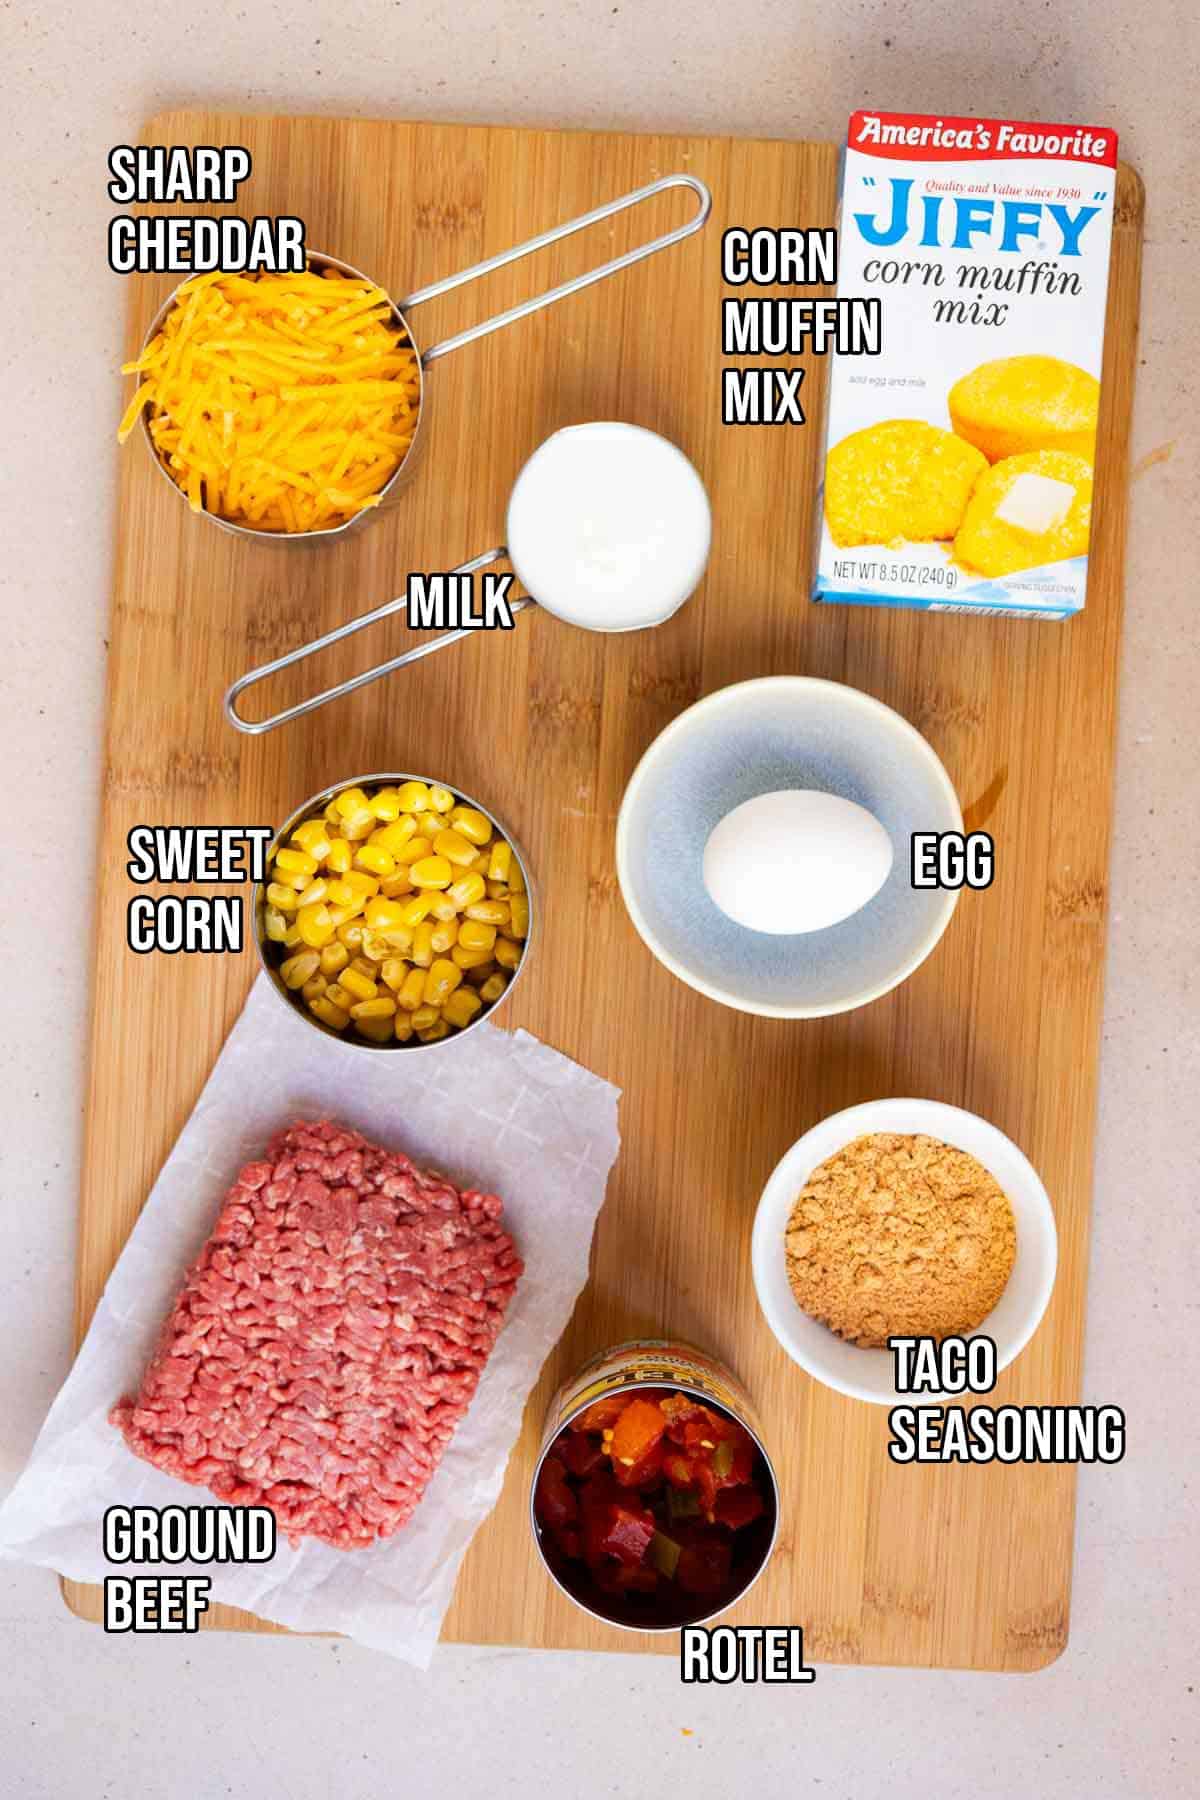 Mexican cornbread casserole ingredients: ground beef, Rotel, taco seasoing, Jiffy Corn Muffin Mix, milk, egg, sweet corn, and shredded cheddar.